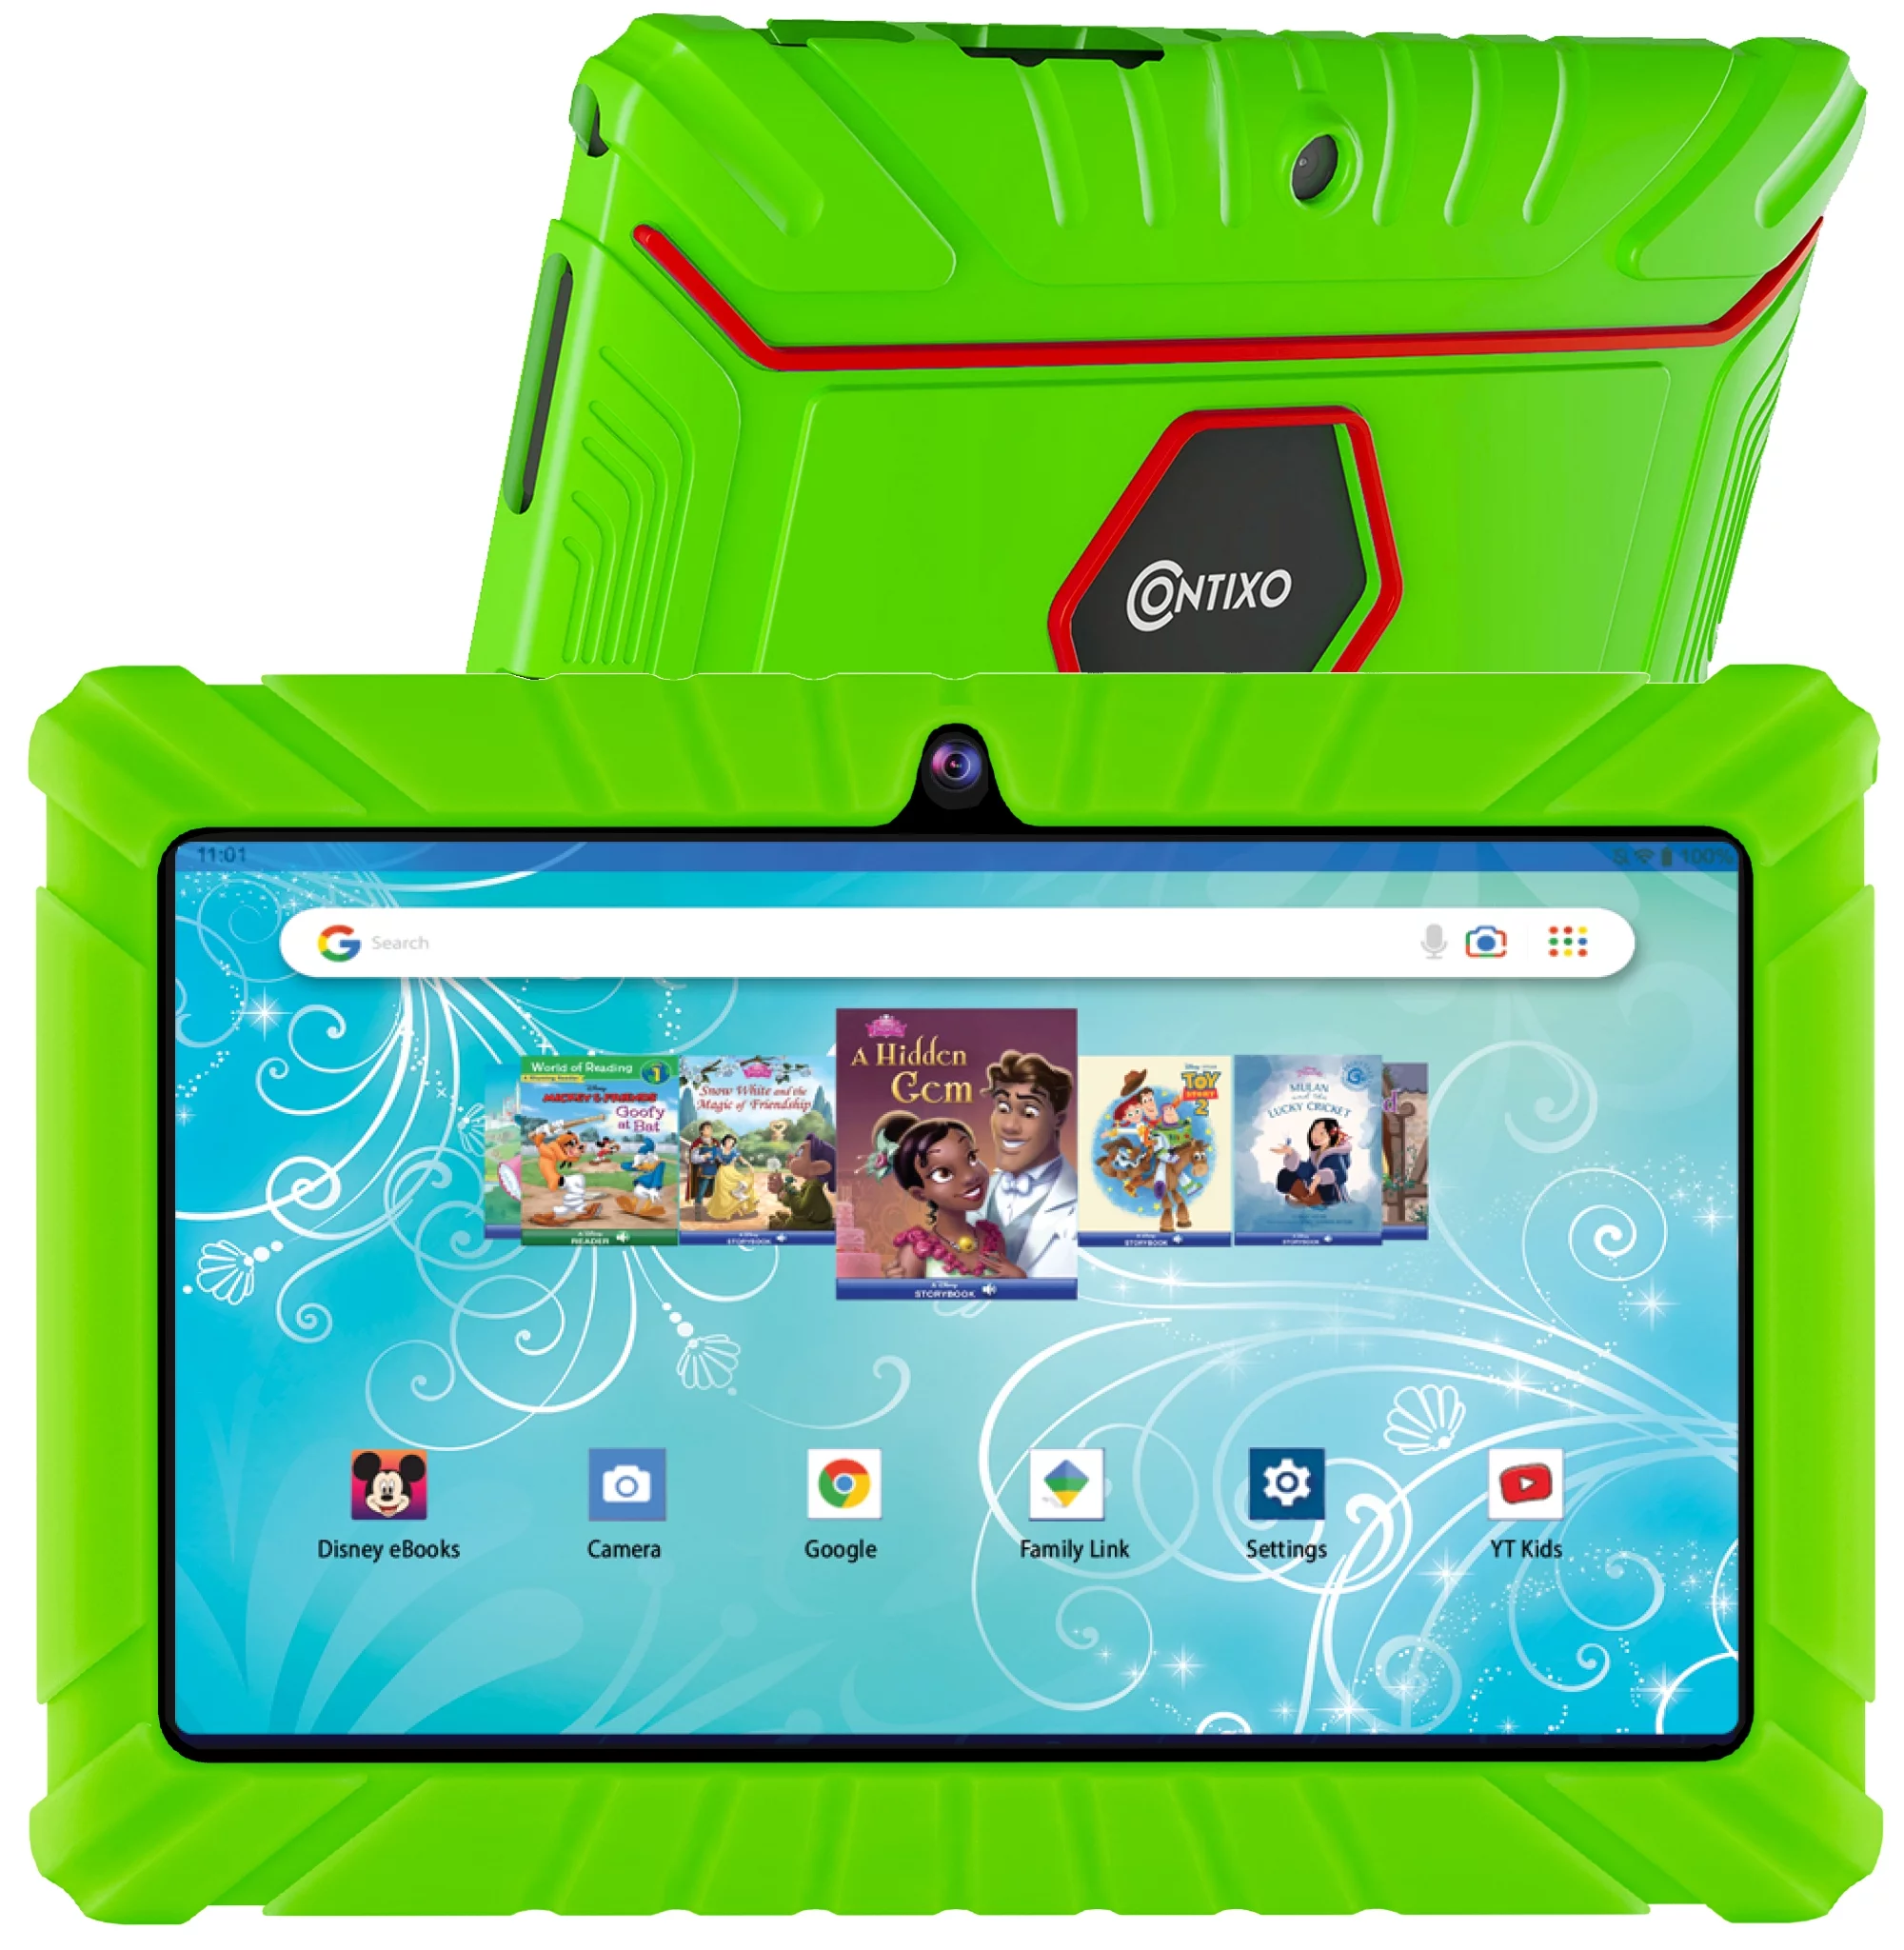 Contixo V8-2 7" Touchscreen 16GB Memory Android Tablet w/Kid-Proof Protective Case, Green